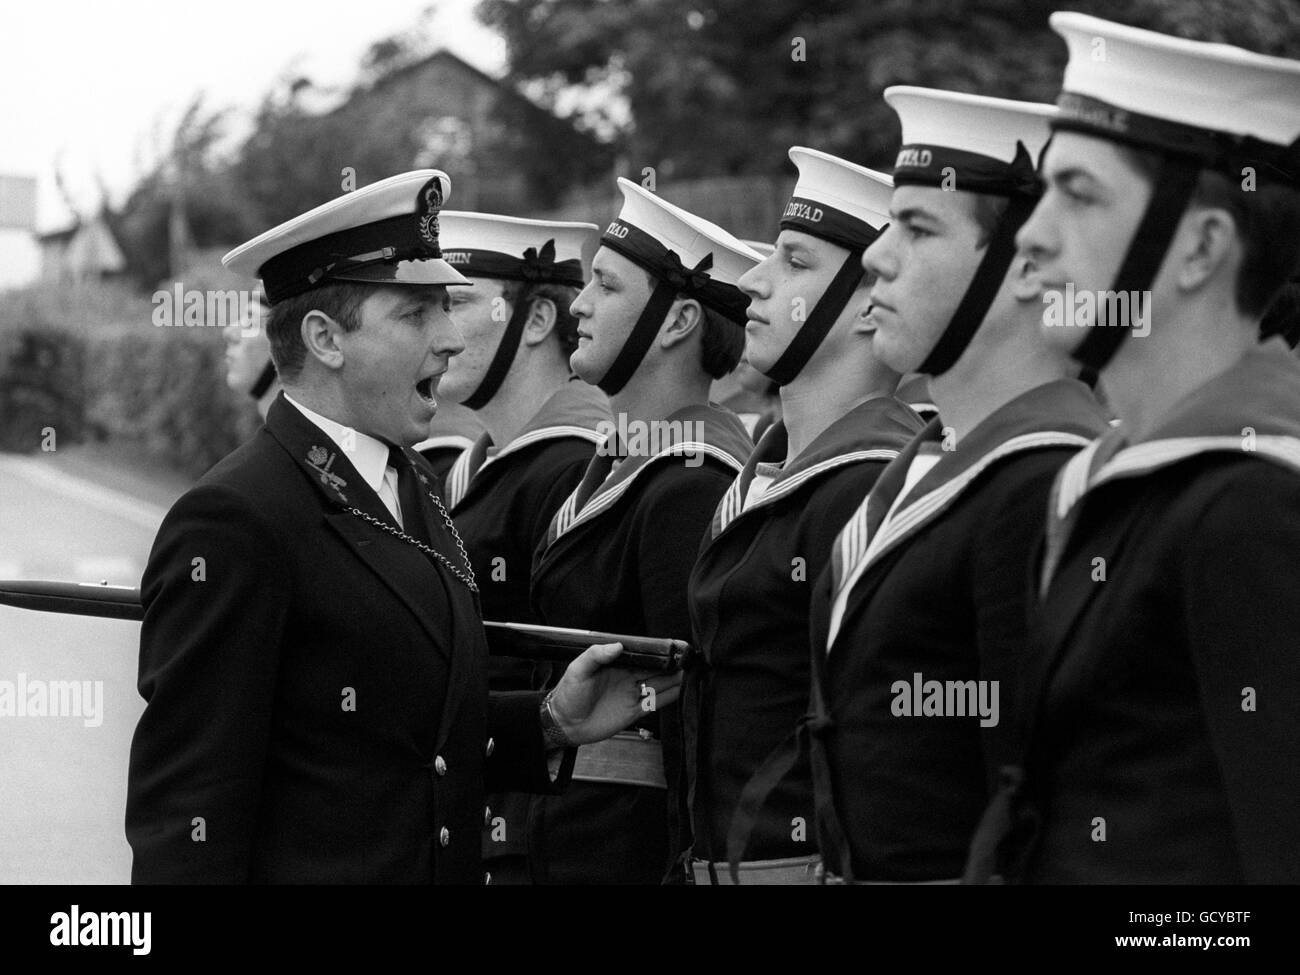 Chief Petty Officer Philip Greenaway issuing orders to some of the Royal Navy sailors who will line the route for the wedding of Prince Charles and Lady Diana Spencer. Some 250 men are being trained for the event at HMS Excellent, Whale Island, Portsmouth. Stock Photo